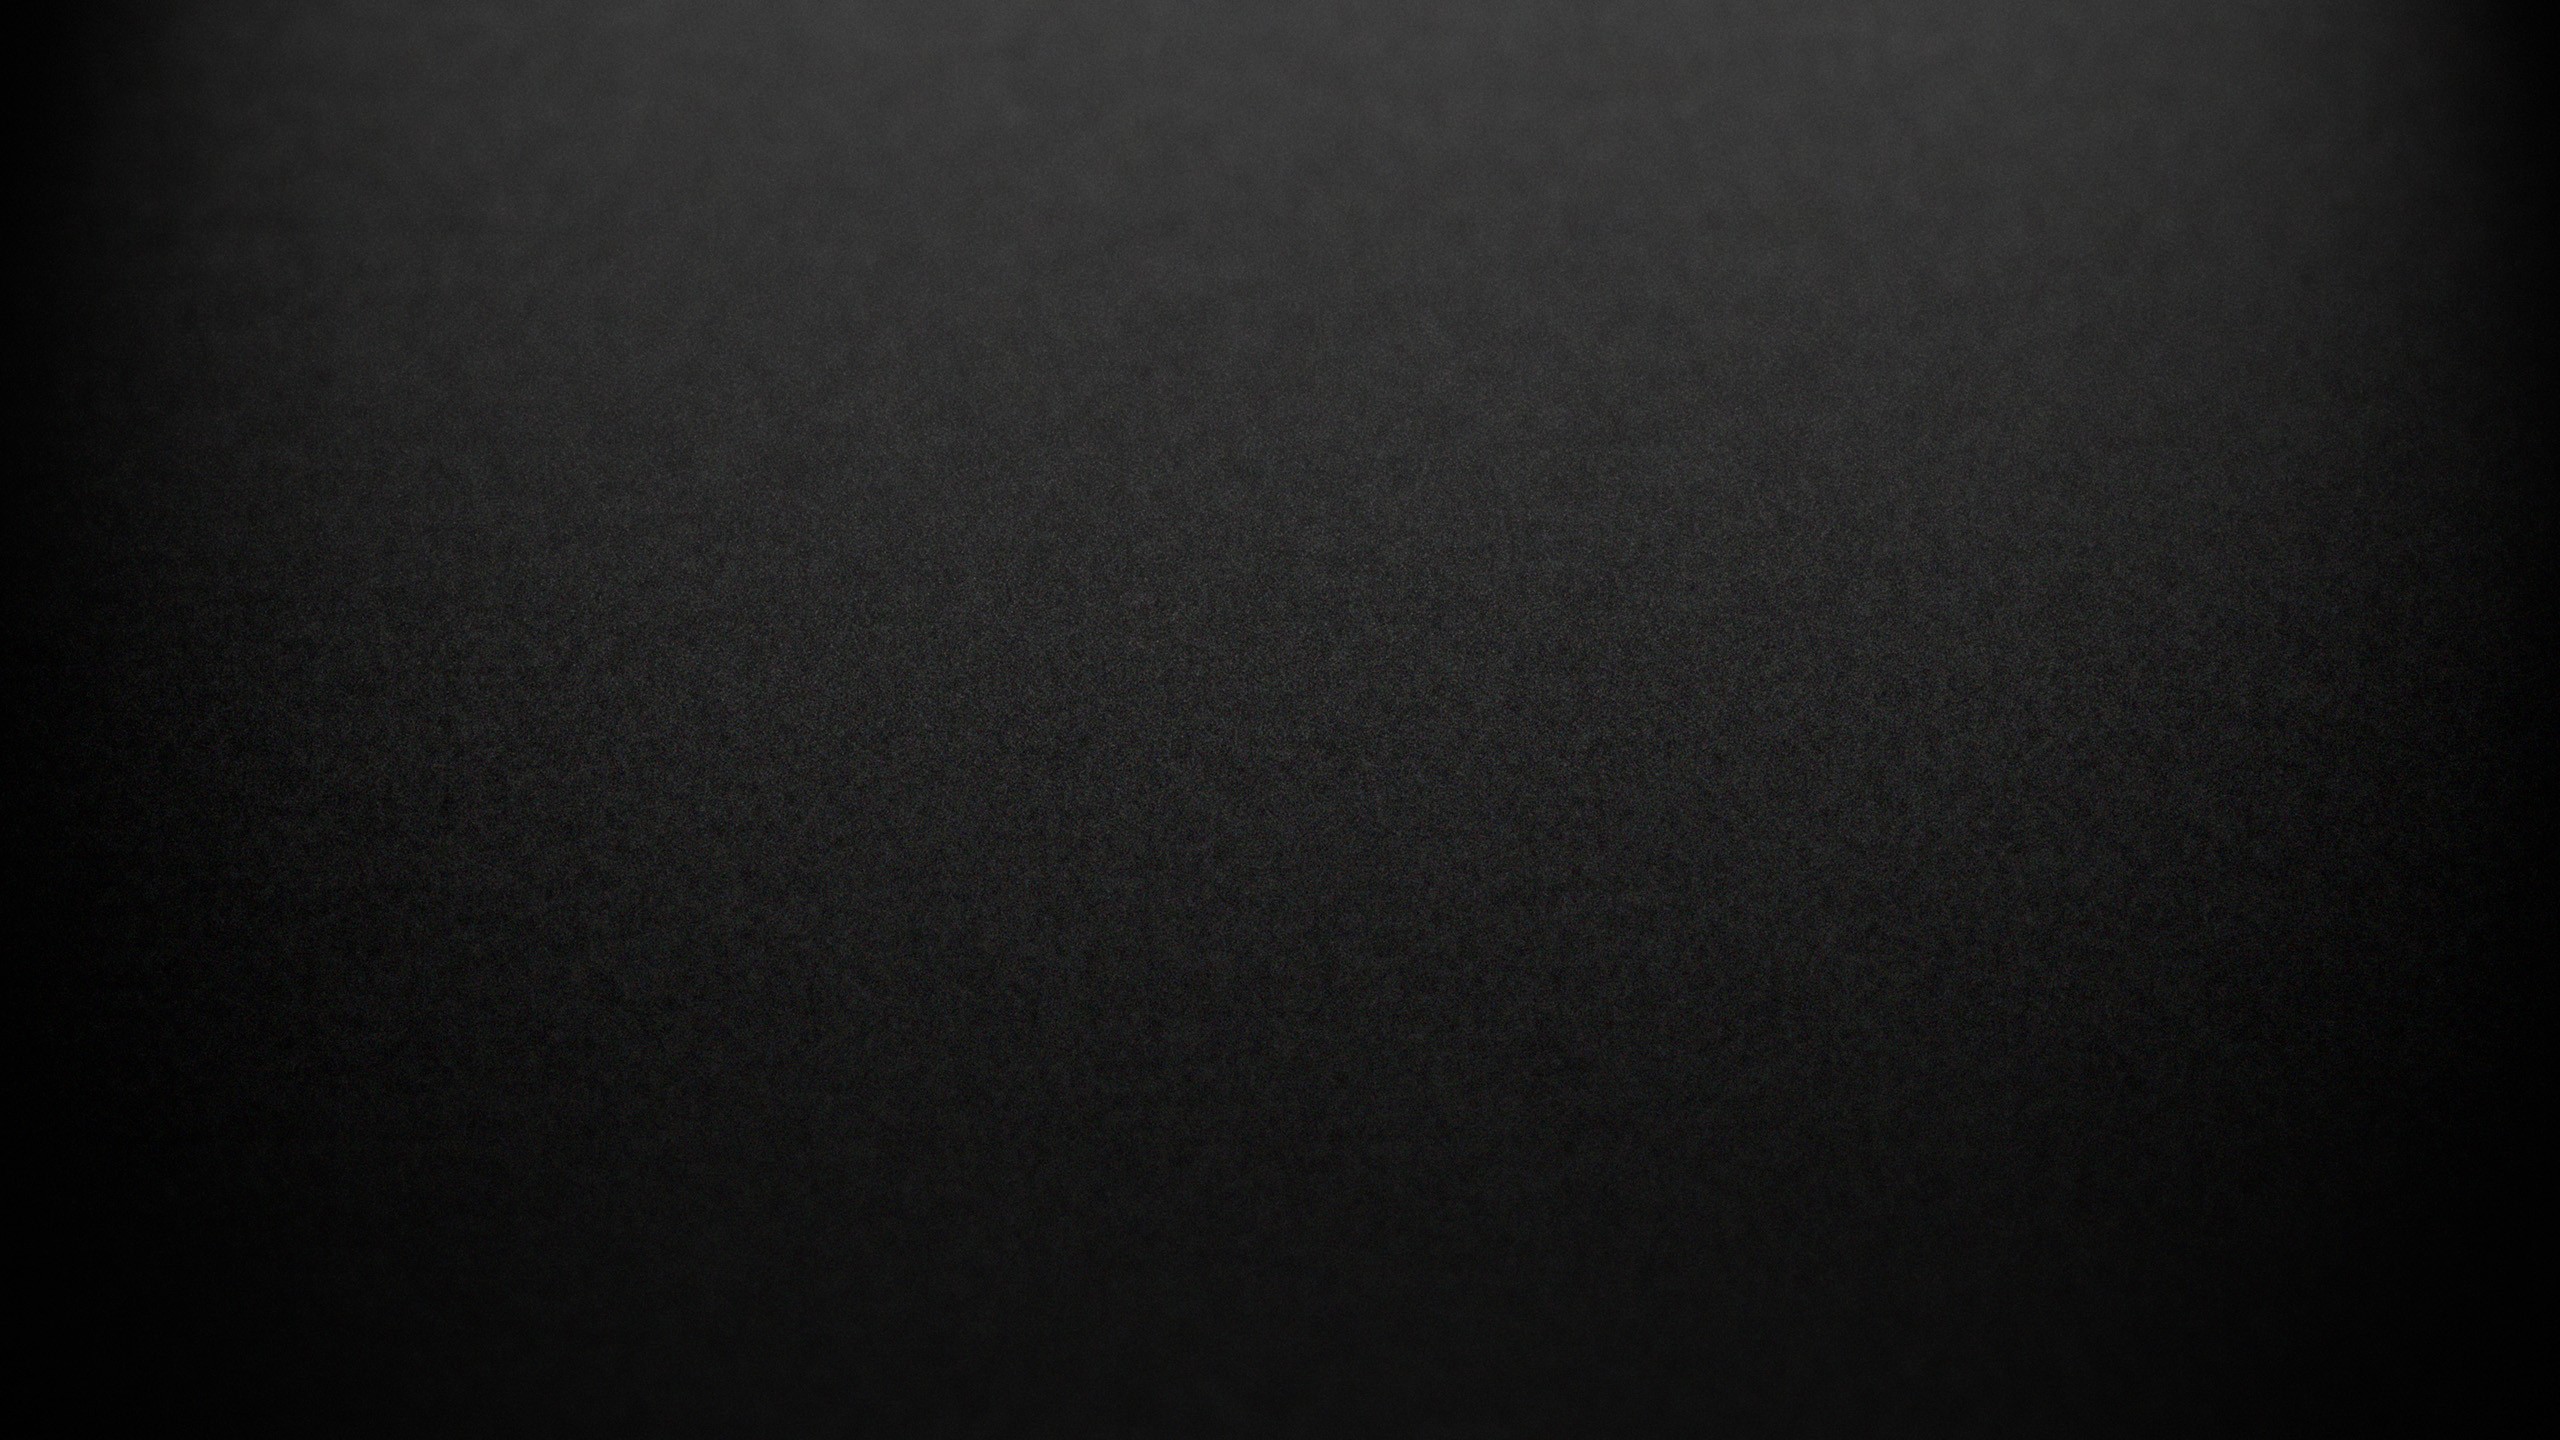 General 2560x1440 simple background texture black